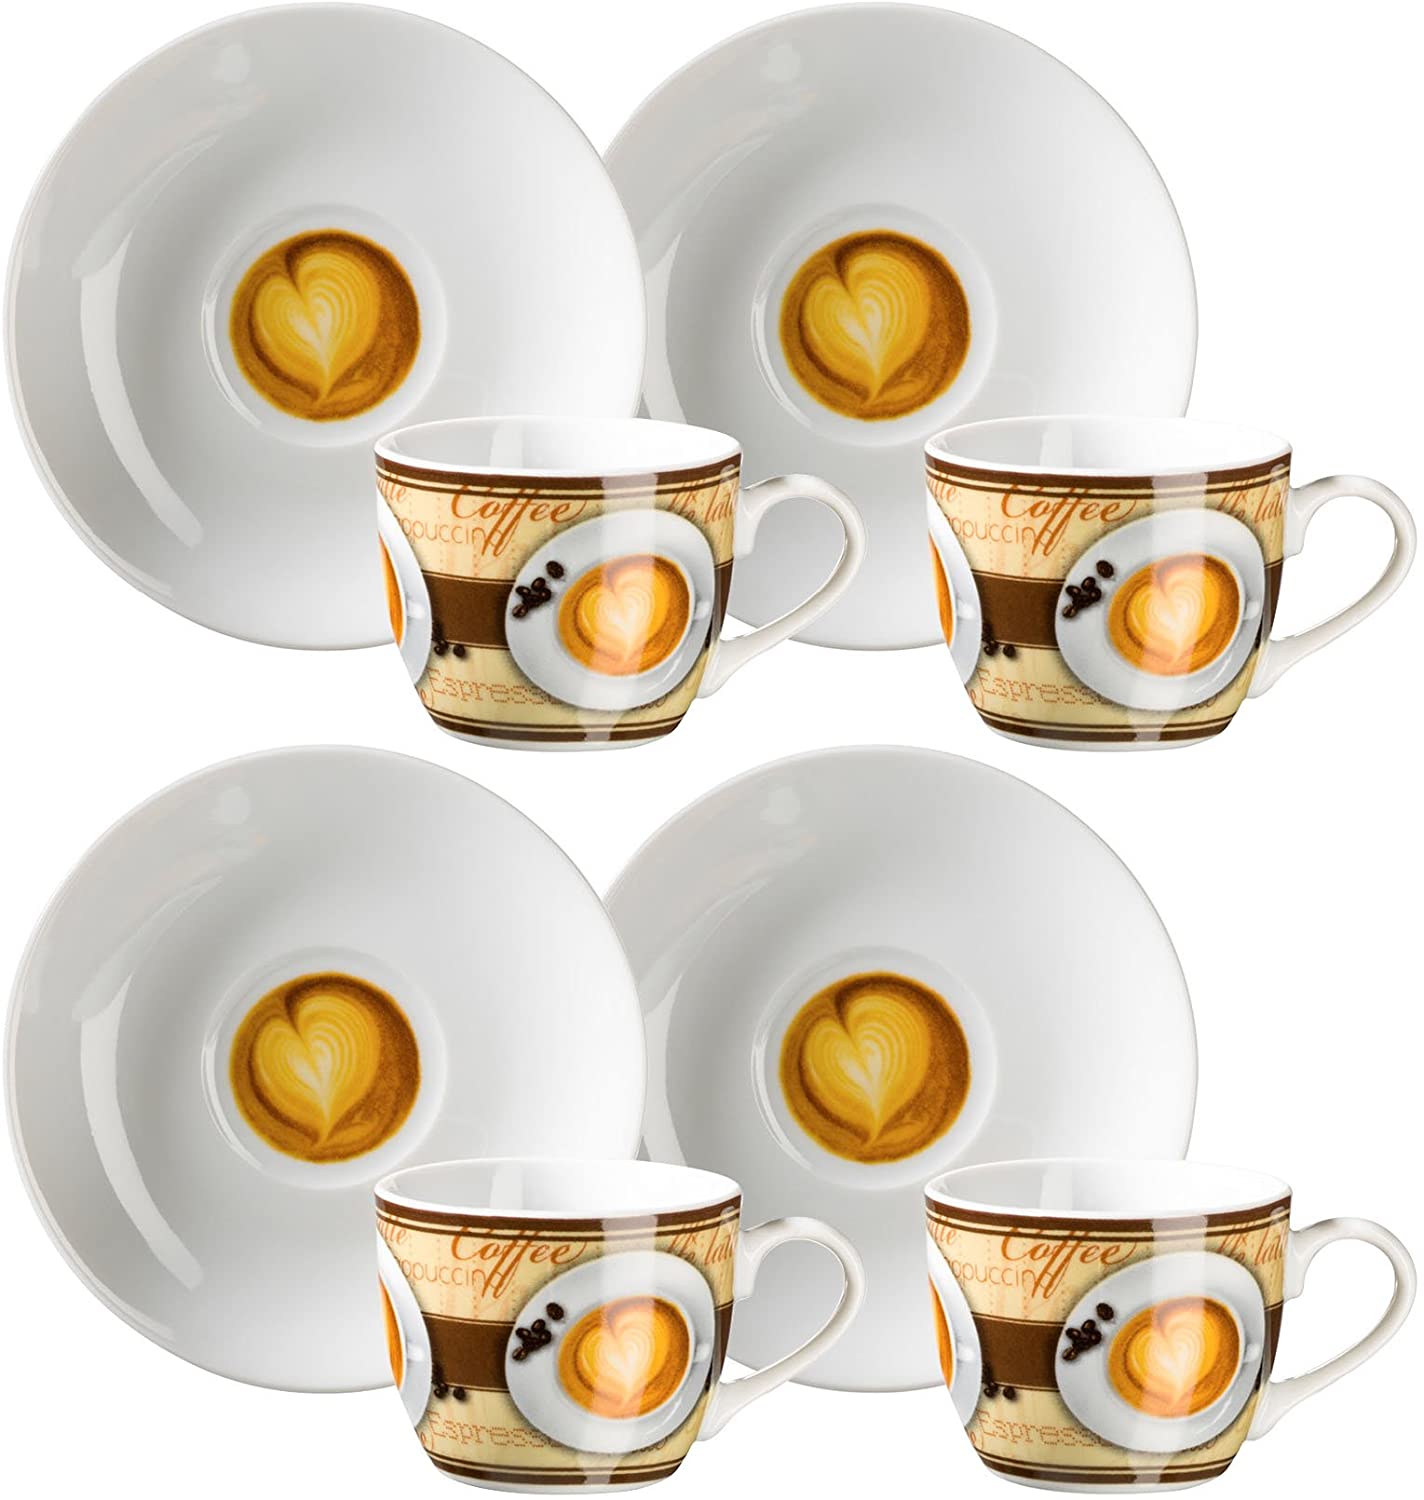 Maser Domestic by Mäser Coffee Fantastic 4 Espresso Cups with Saucers, Set of 8